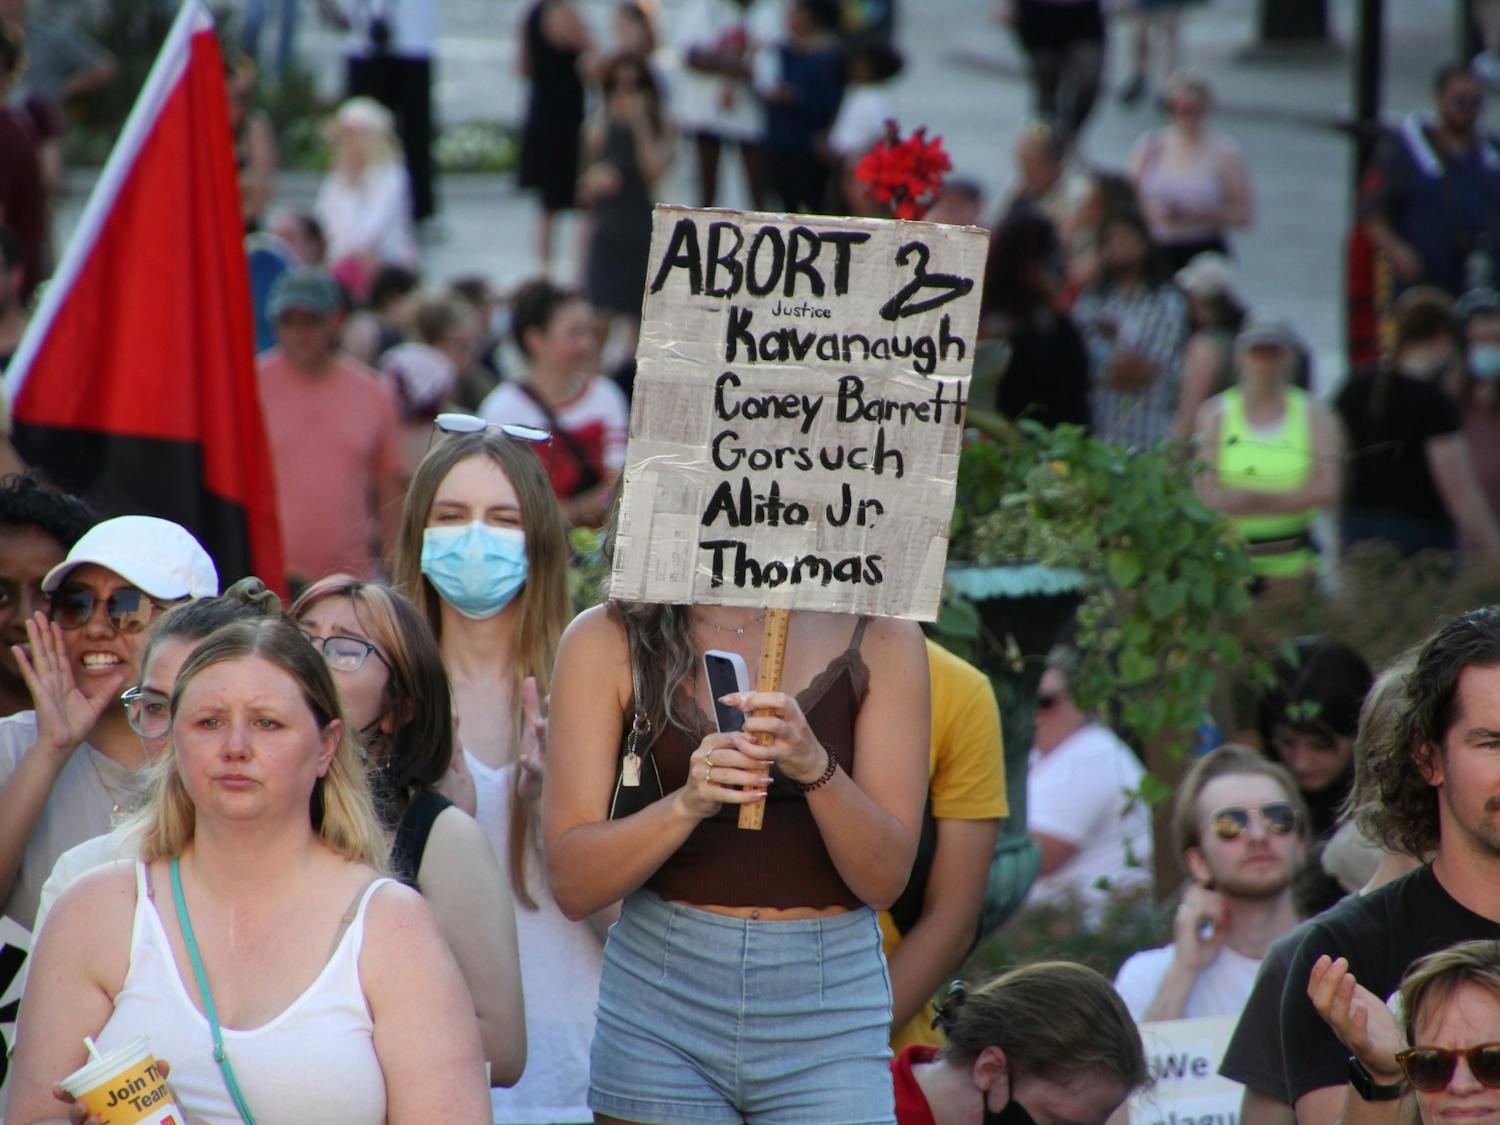 PHOTOS: 6/24/22 Abortion rights advocates protest against the overturning of Roe v. Wade